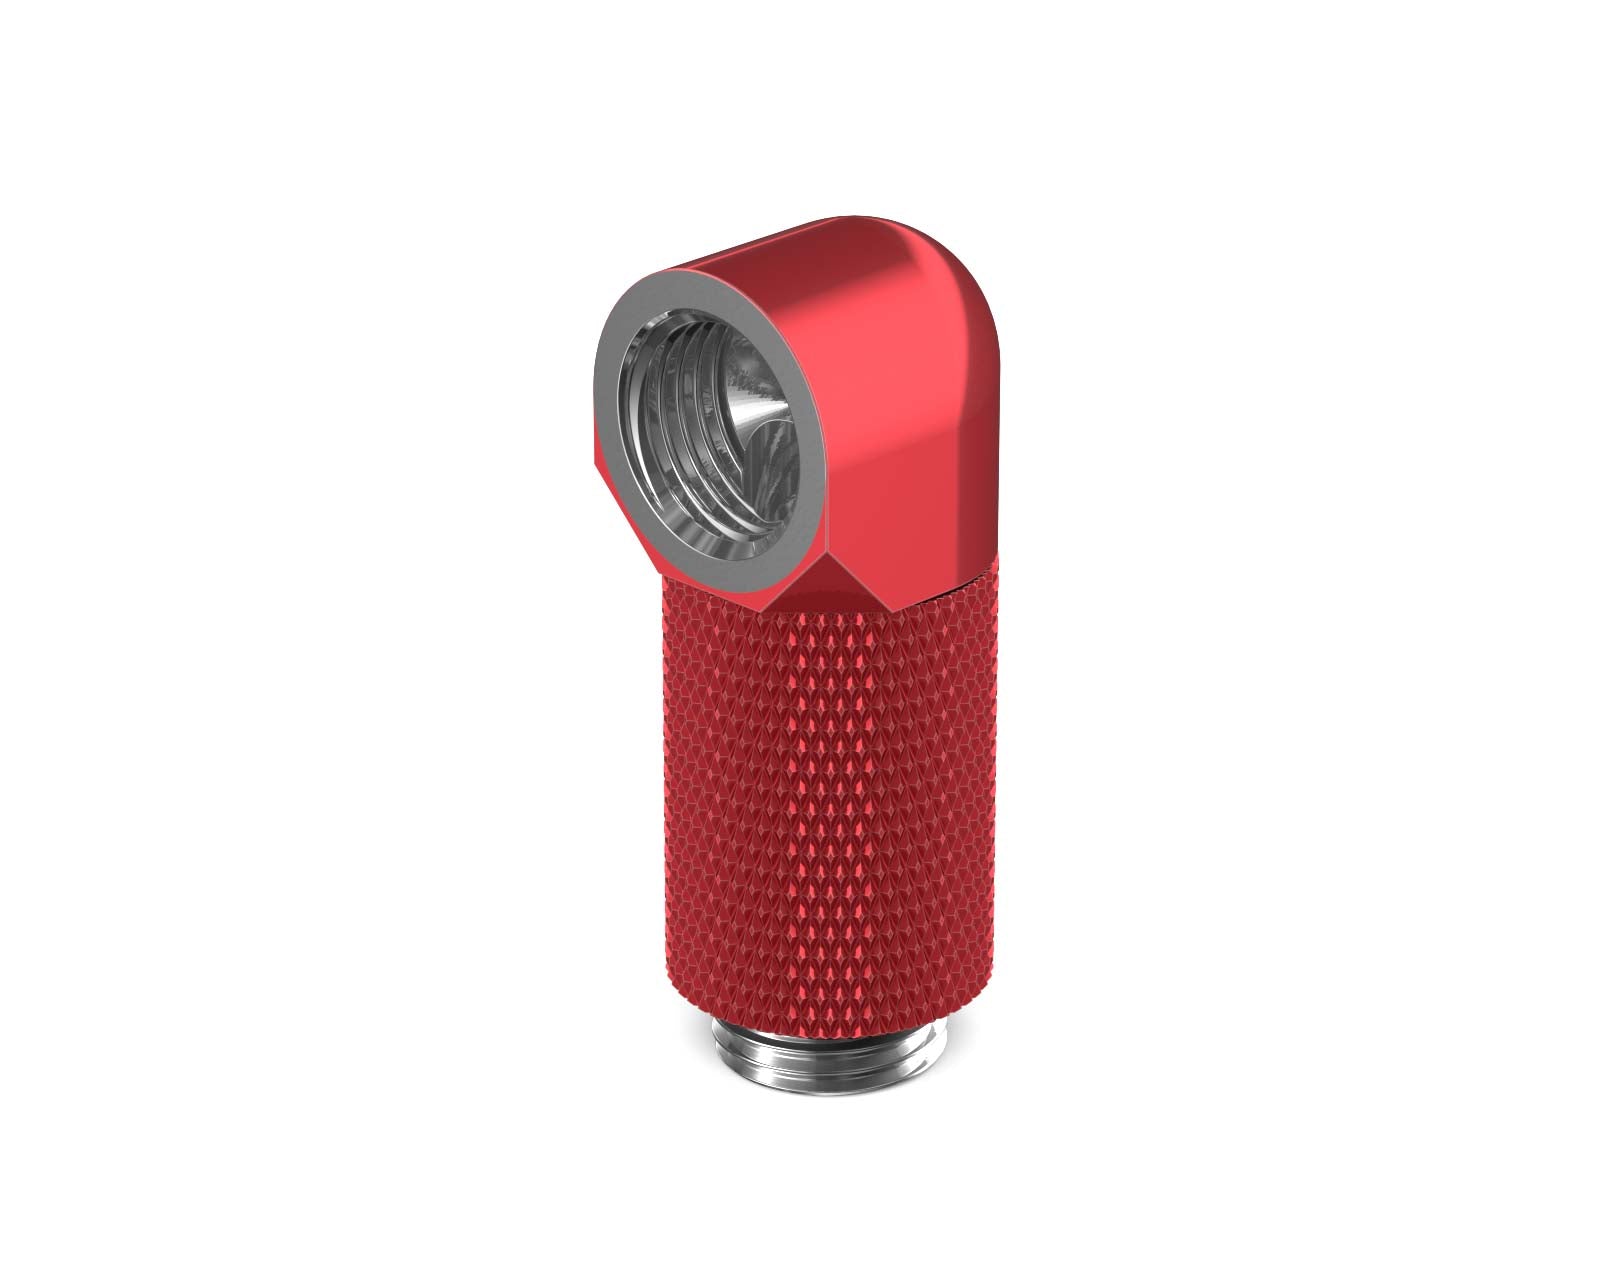 PrimoChill Male to Female G 1/4in. 90 Degree SX Rotary 25mm Extension Elbow Fitting - PrimoChill - KEEPING IT COOL Candy Red